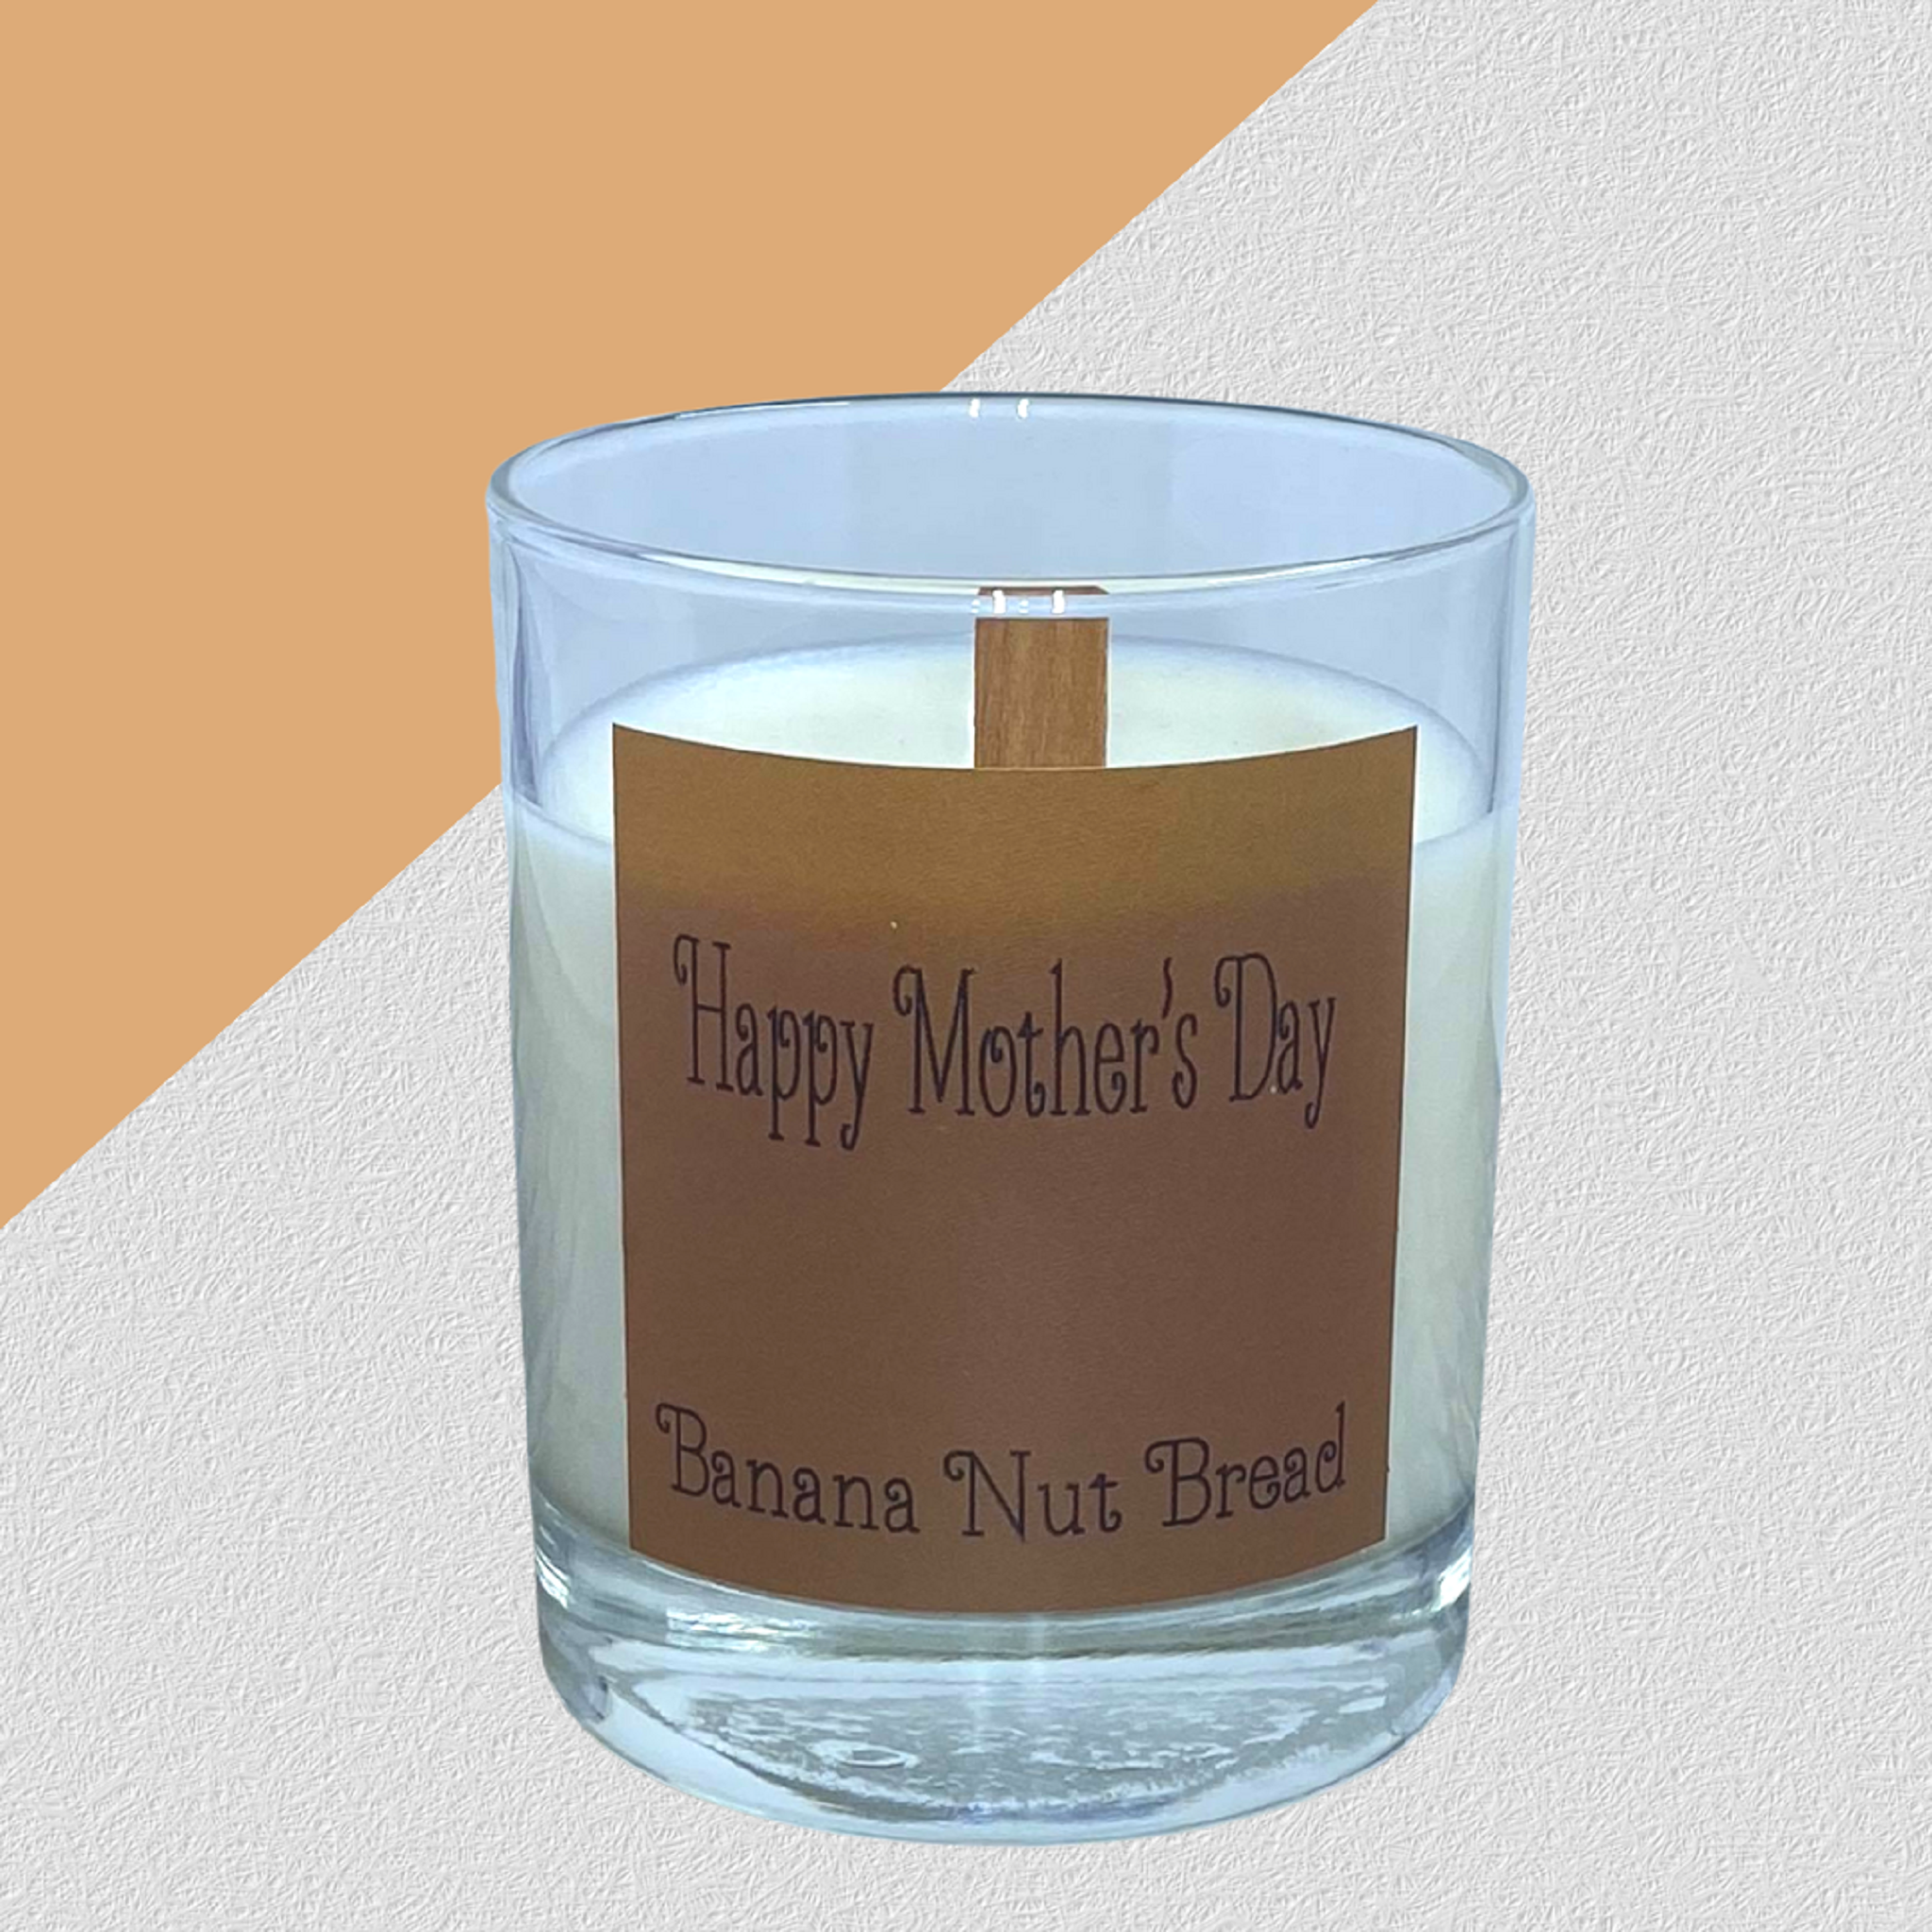 Happy Mother's Day with Banana Nut Bread scent